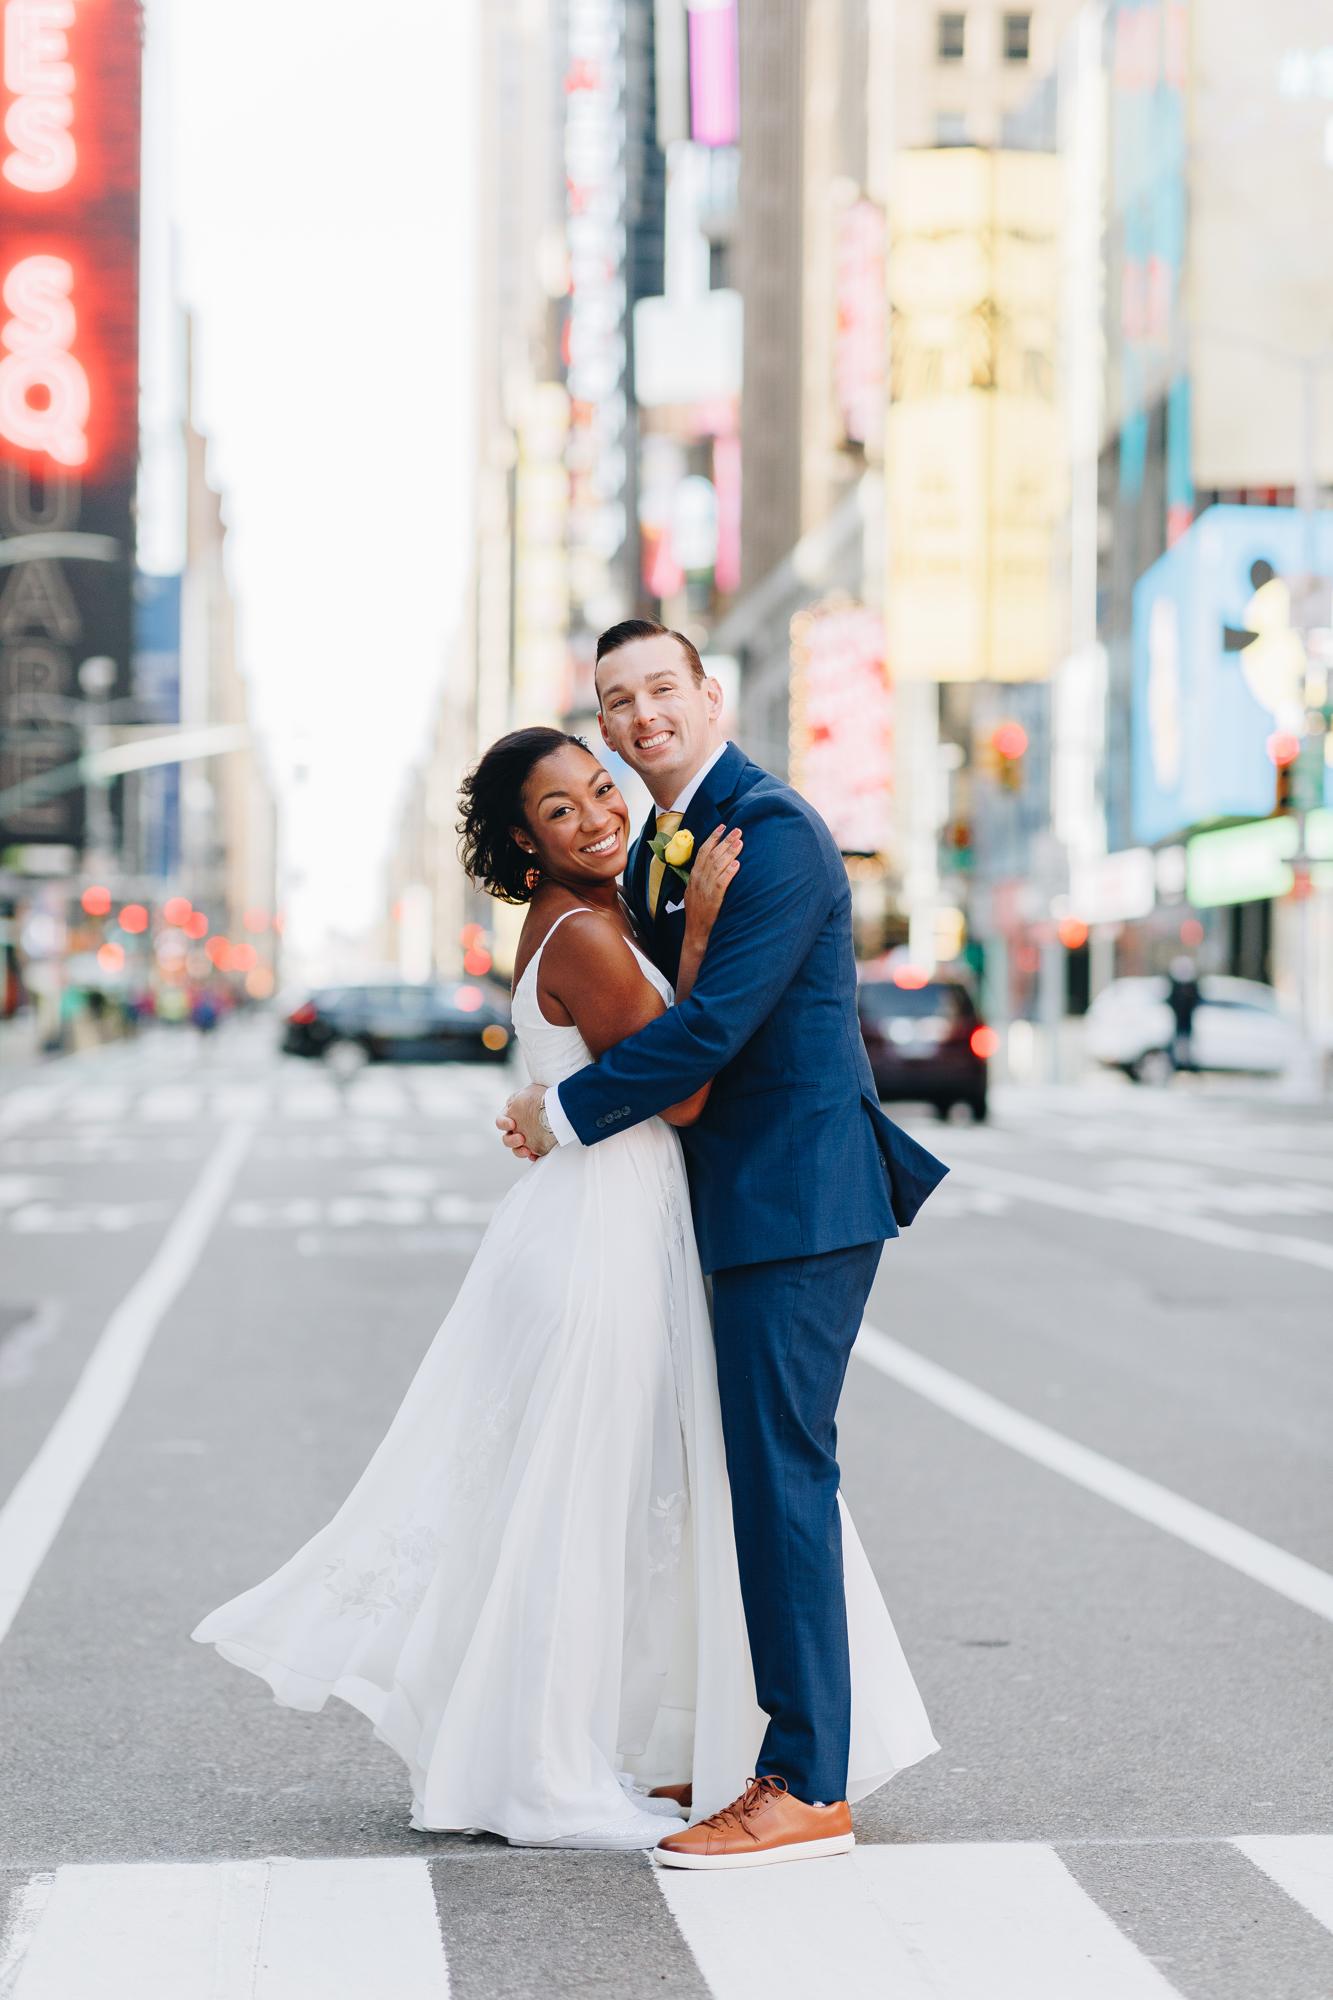 Posed Times Square Wedding Photos in NYC